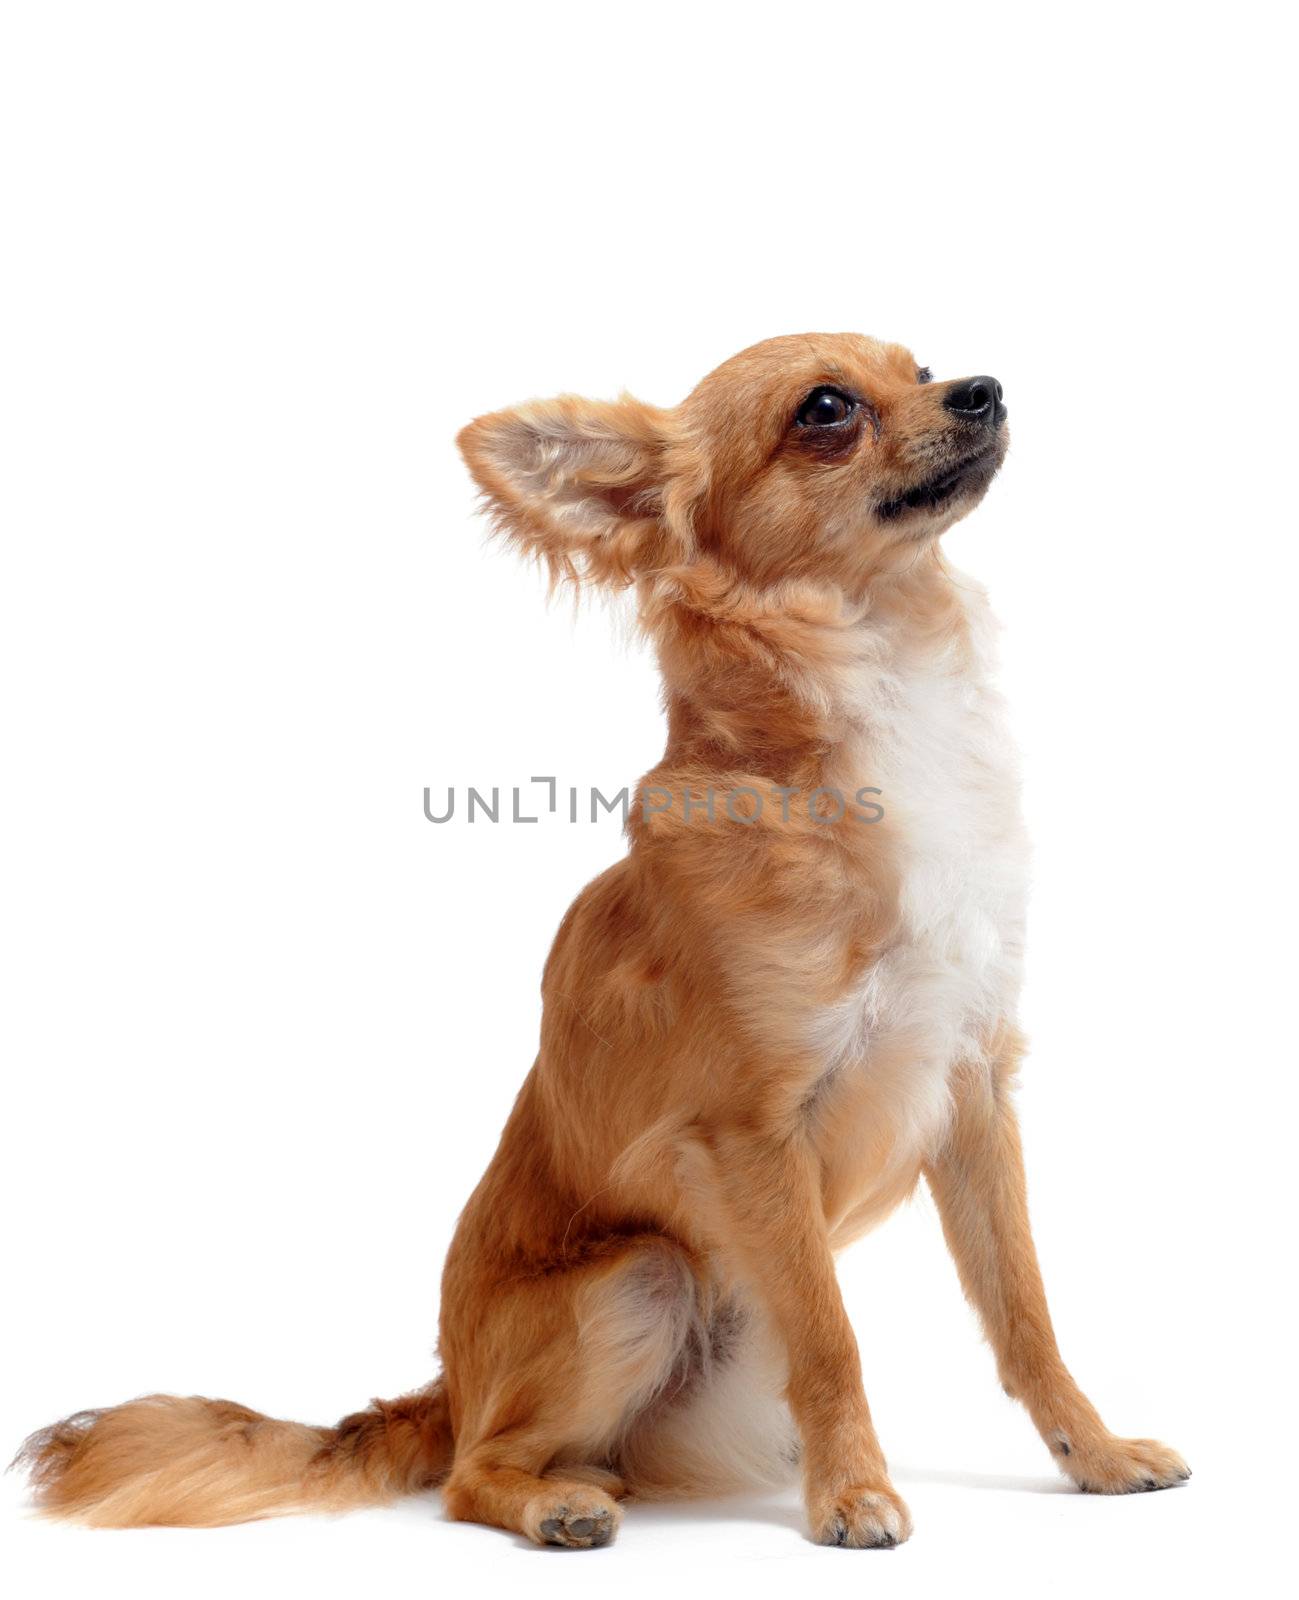 portrait of a cute purebred chihuahua in front of white background